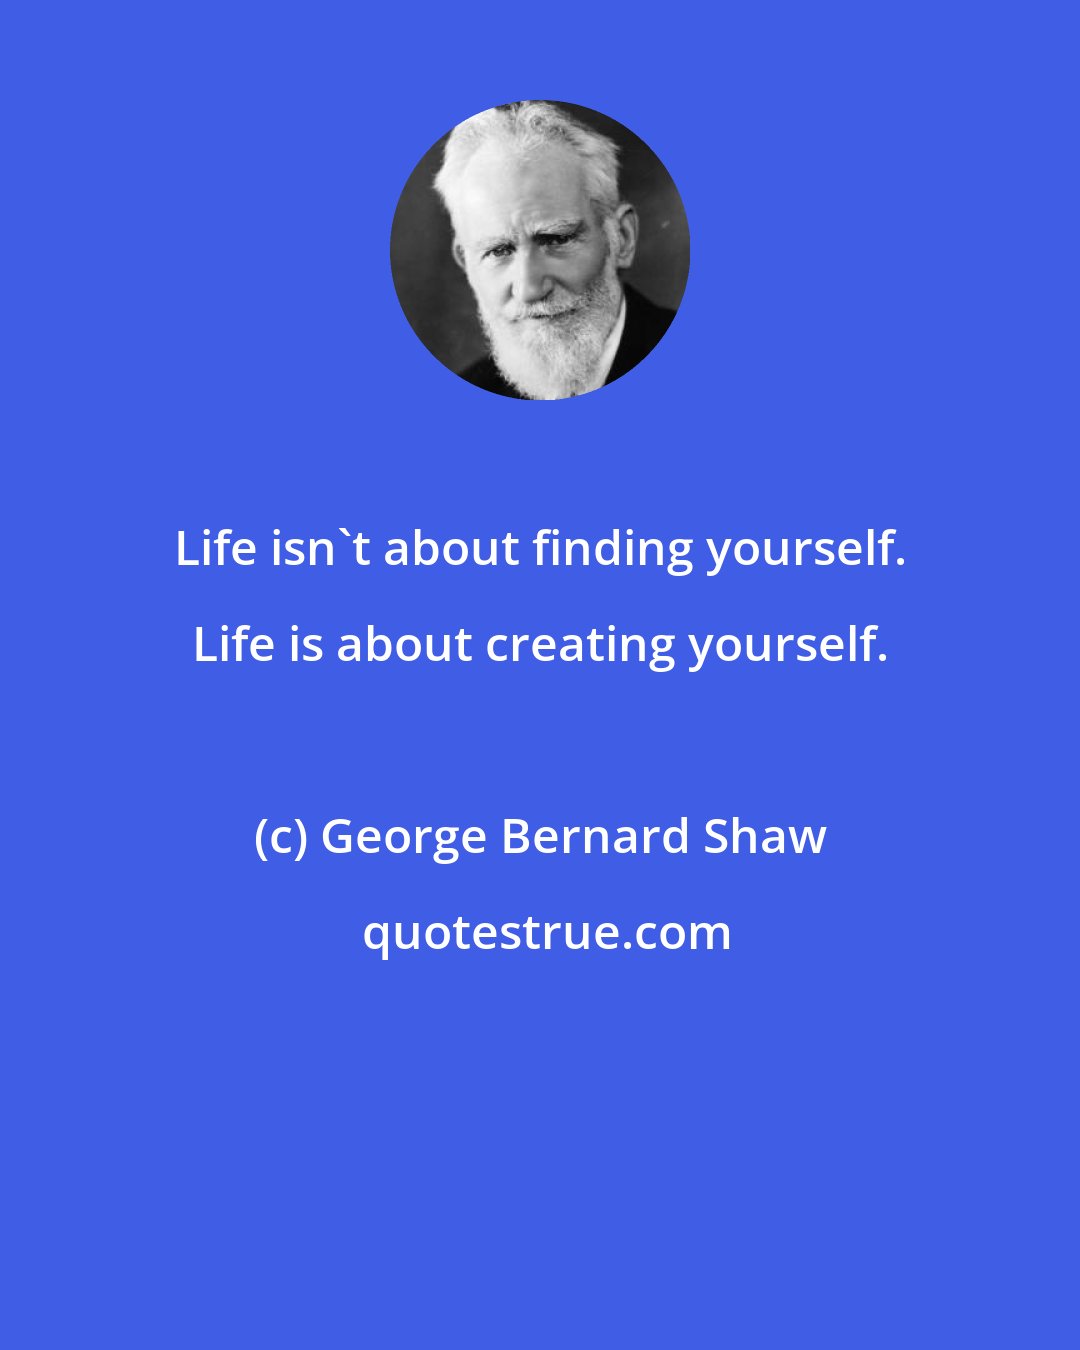 George Bernard Shaw: Life isn't about finding yourself. Life is about creating yourself.